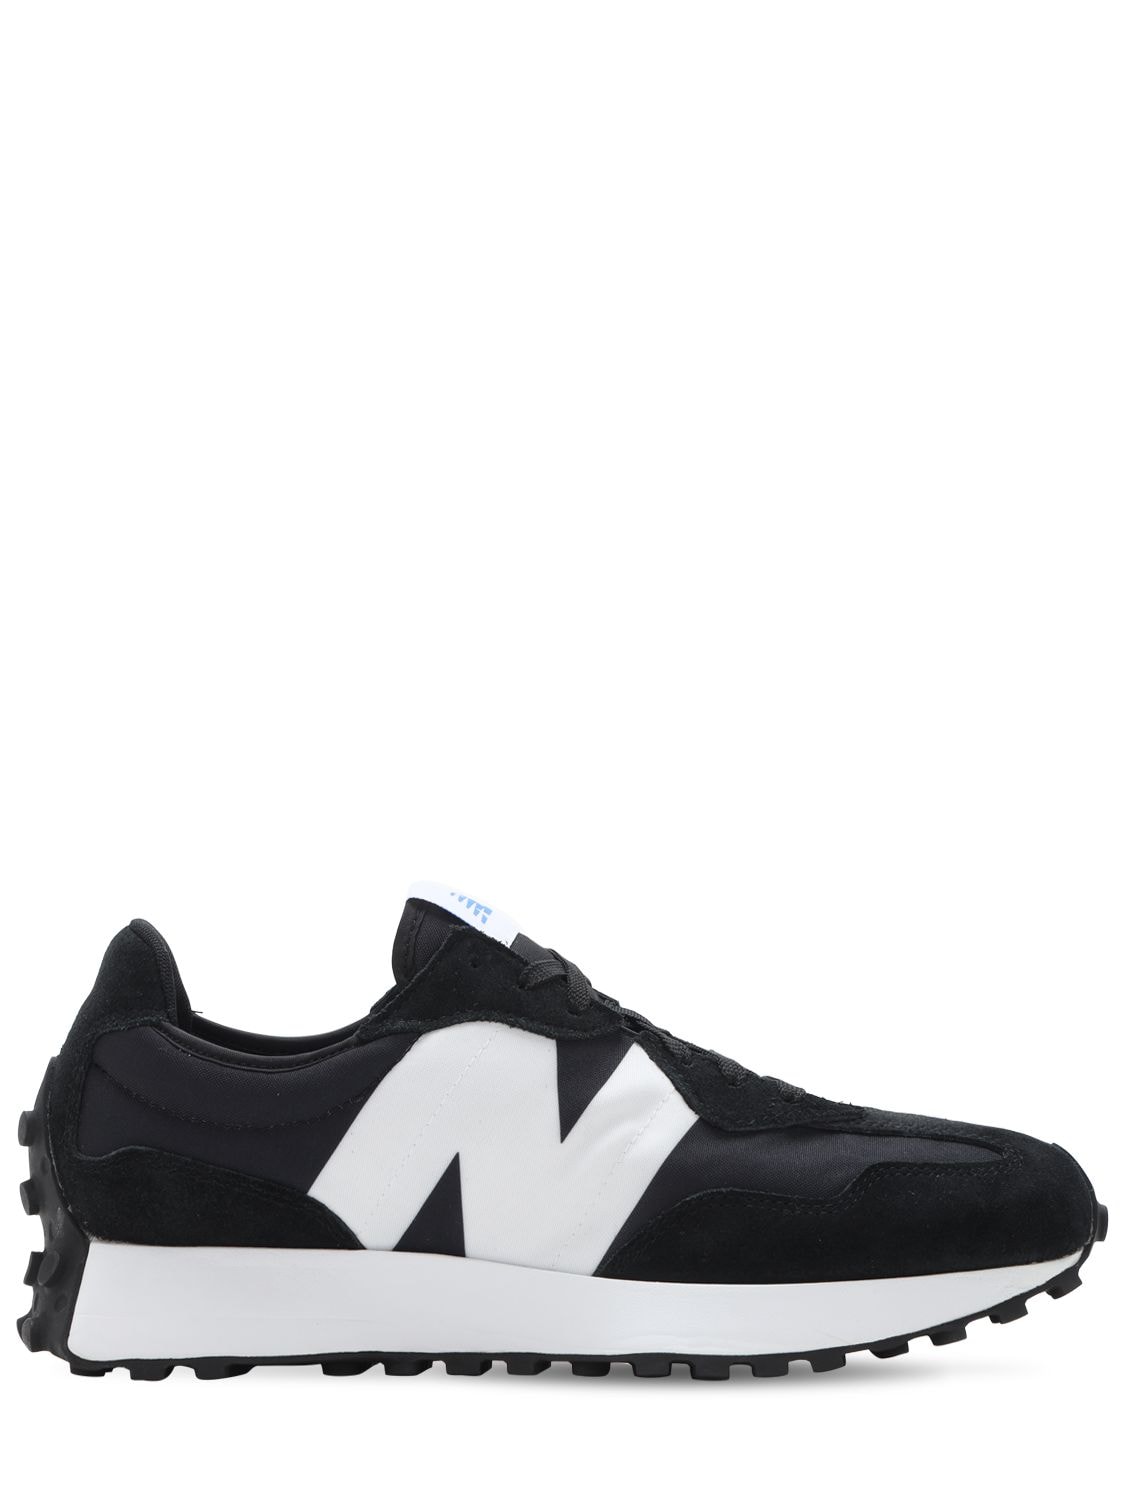 New Balance Low '327' Black And White '327' Sneakers